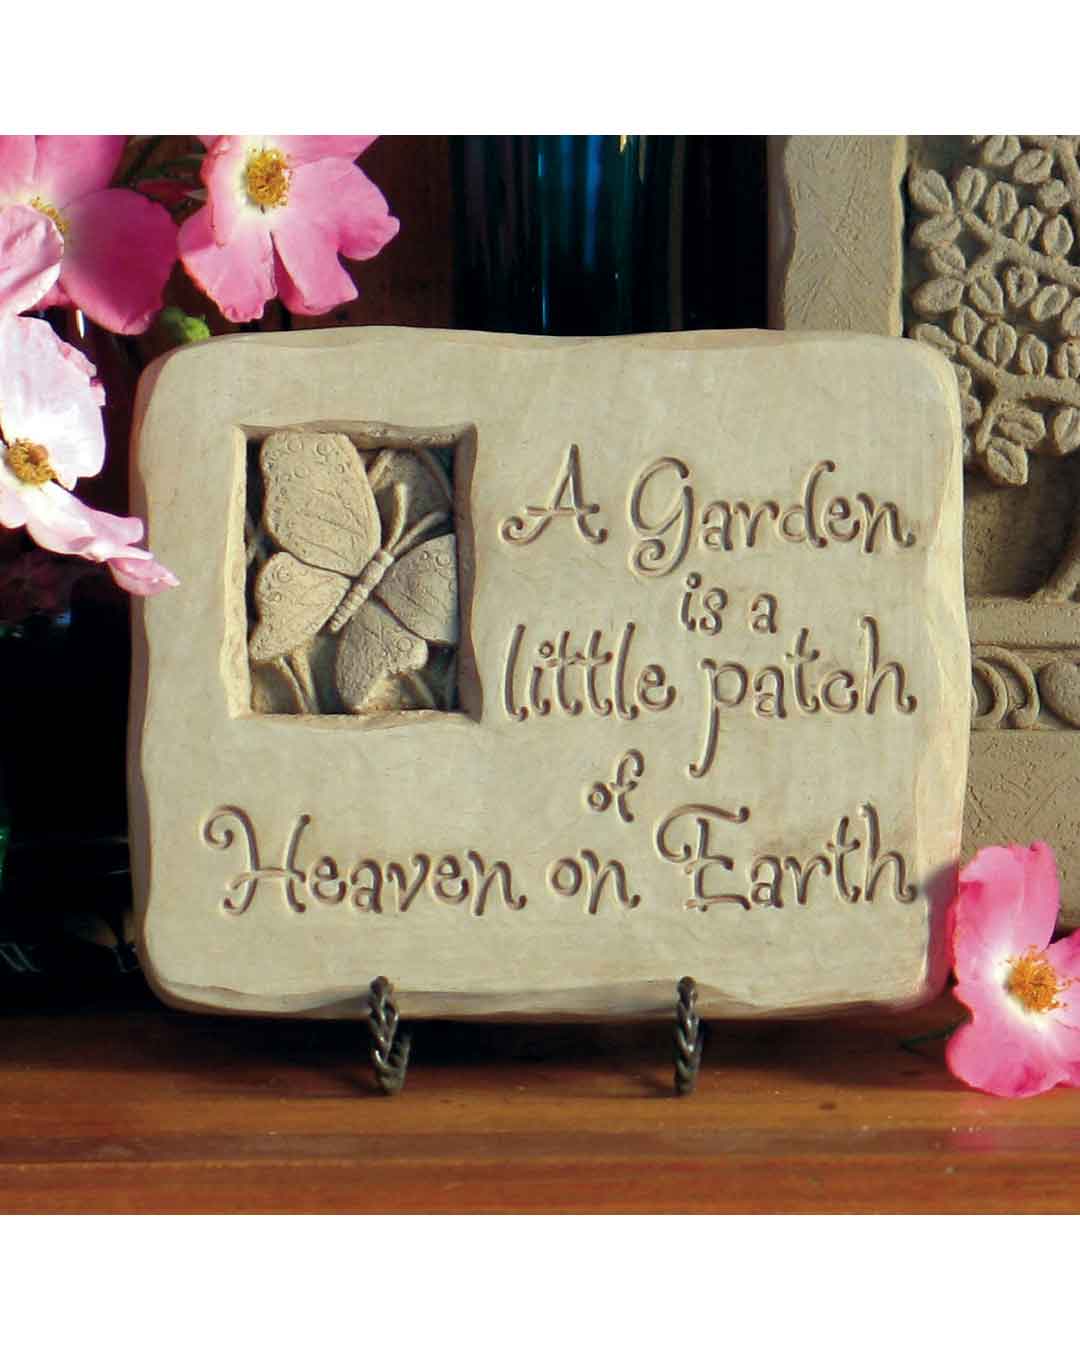 You are currently viewing Personalized Garden Gifts: Ideas for Unique and Thoughtful Presents